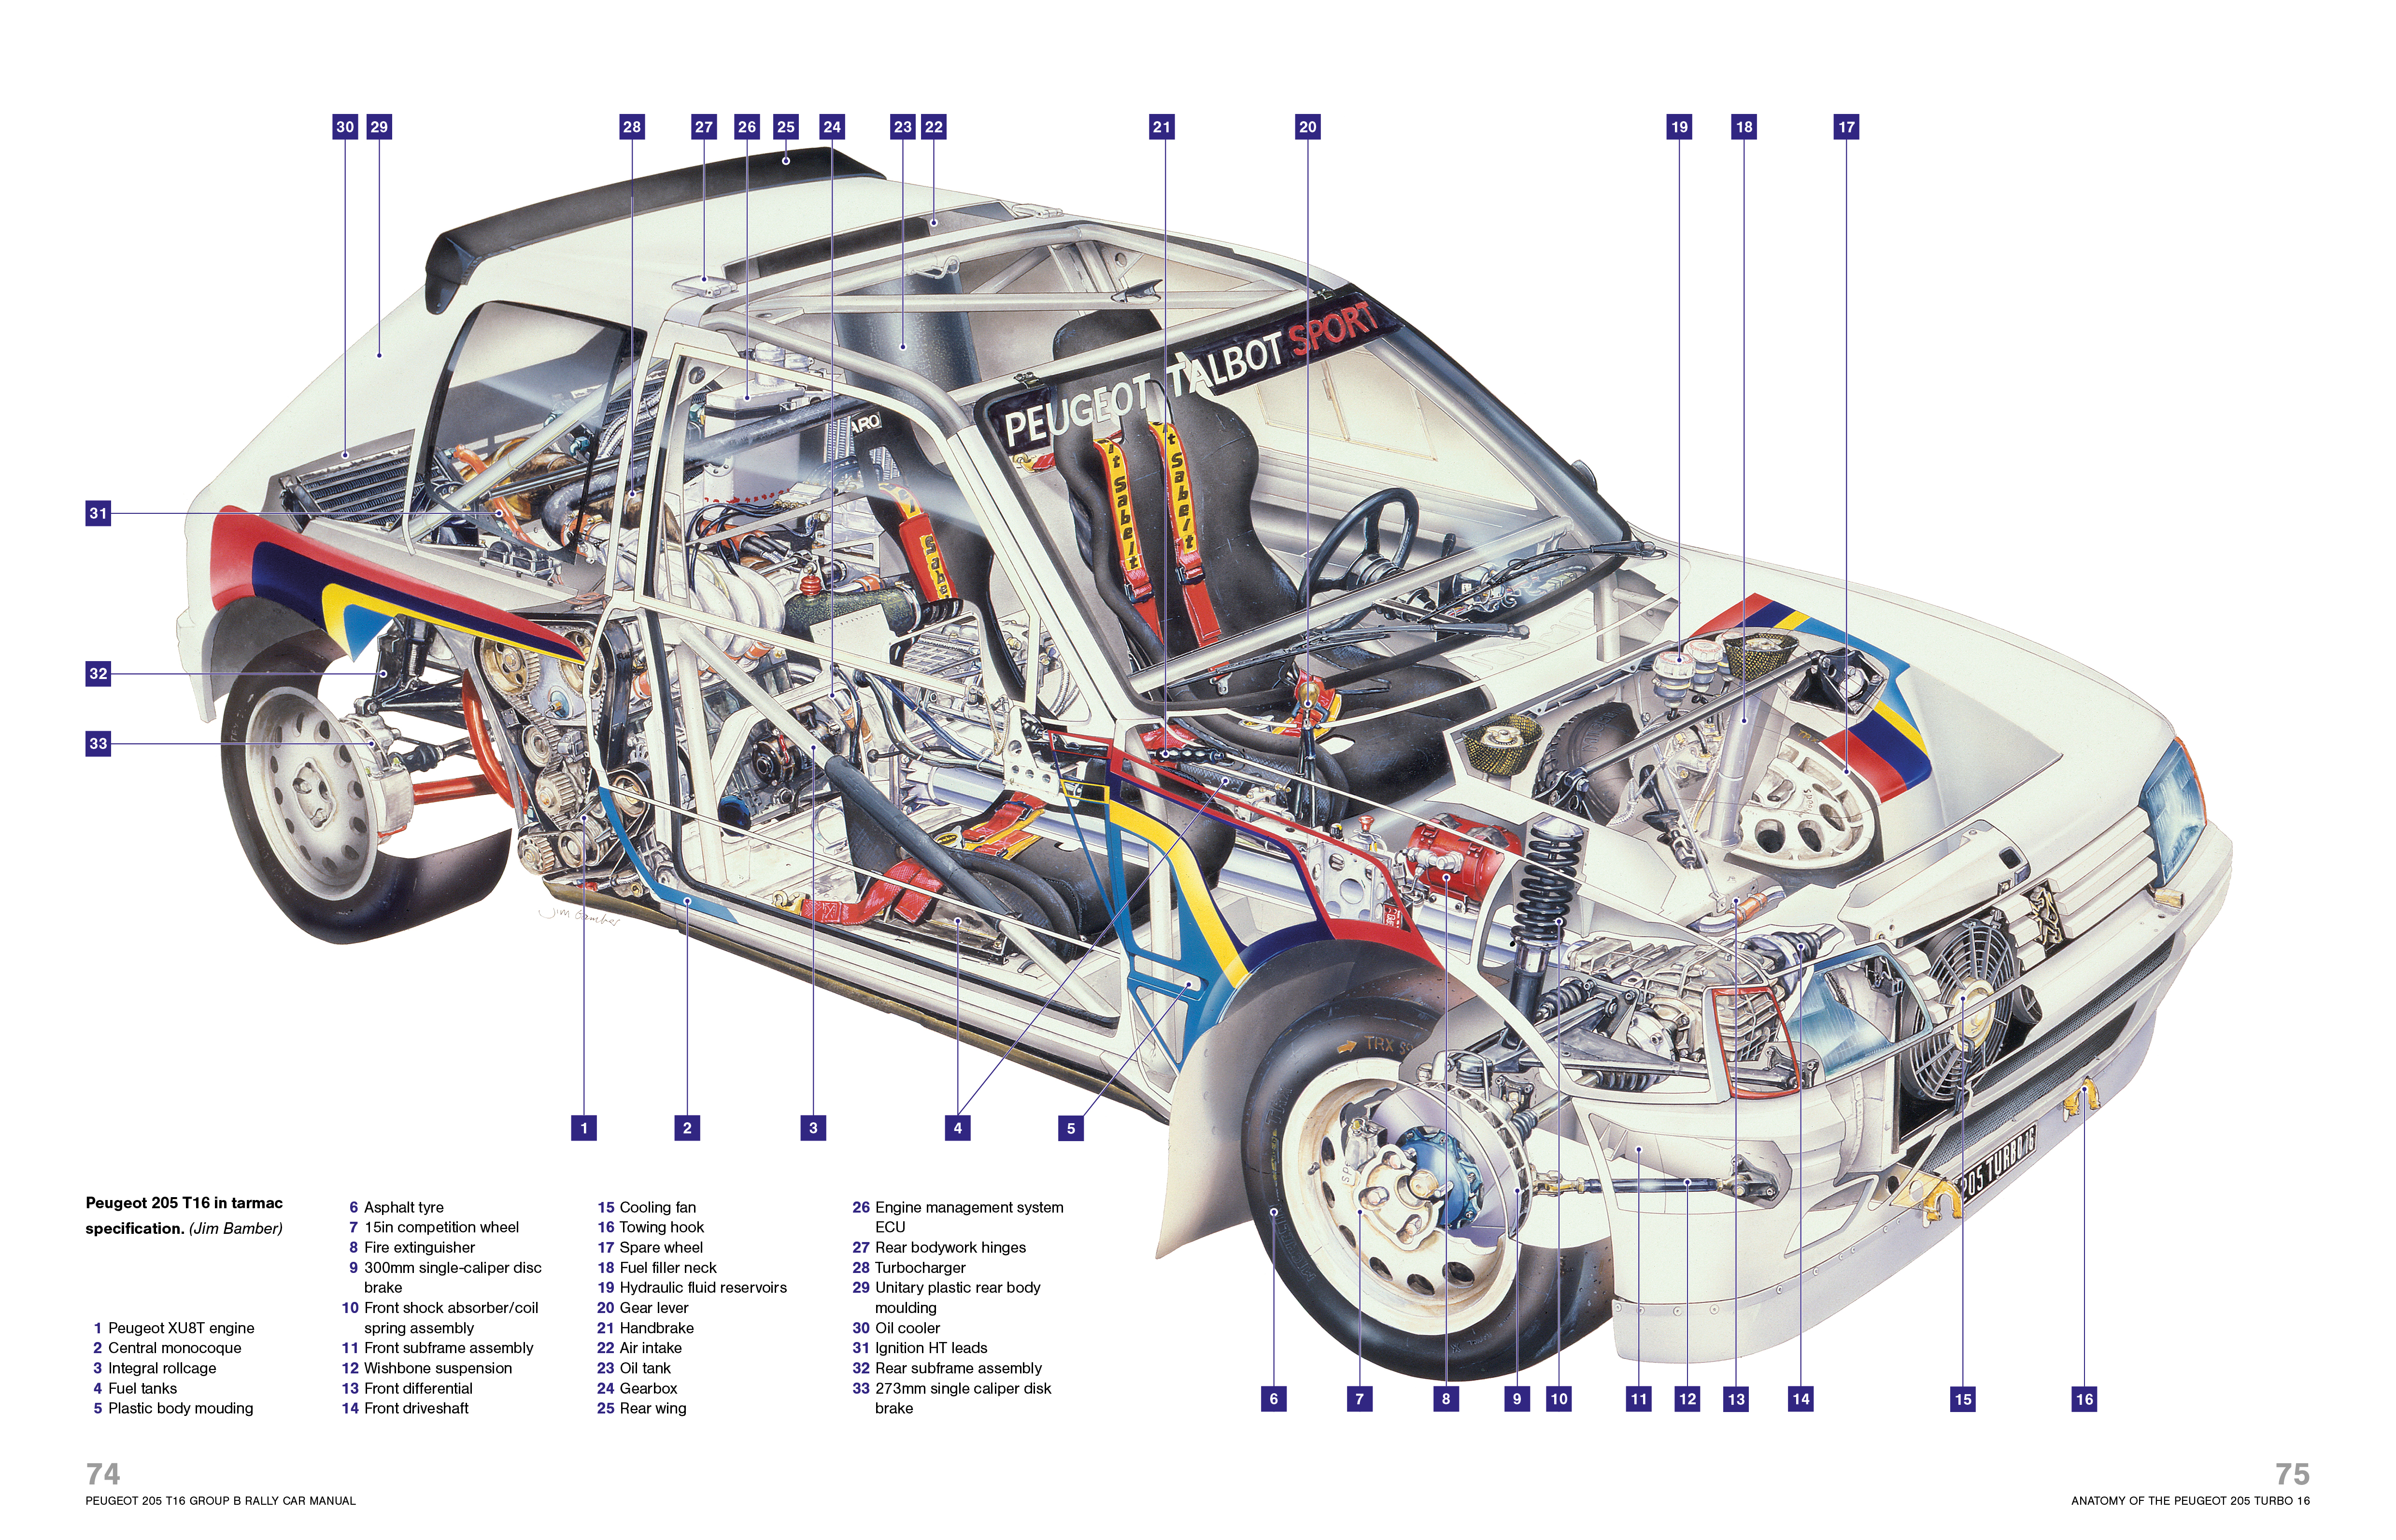 Peugeot 205 T16 Group B Rally Car 1983 to 1988